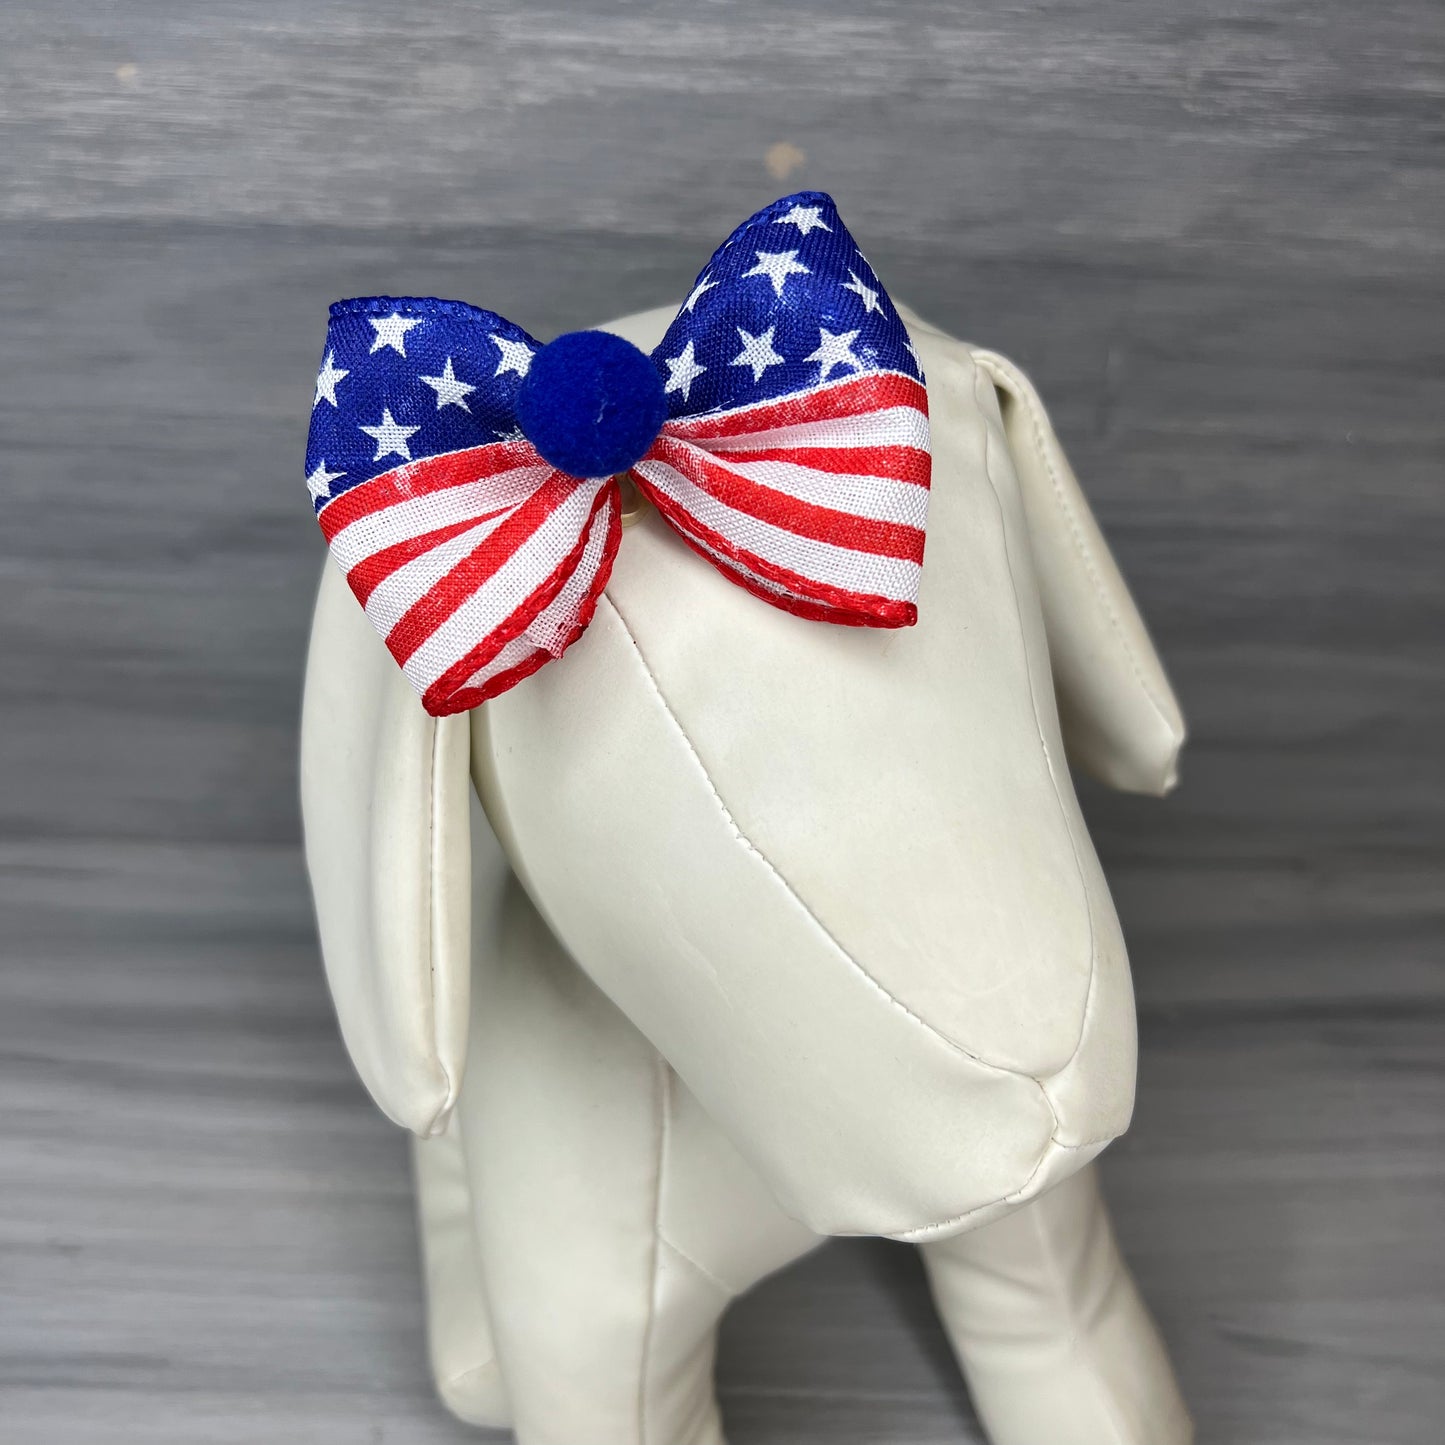 Stars and Stripes - Over the Top - 12 Large Bows